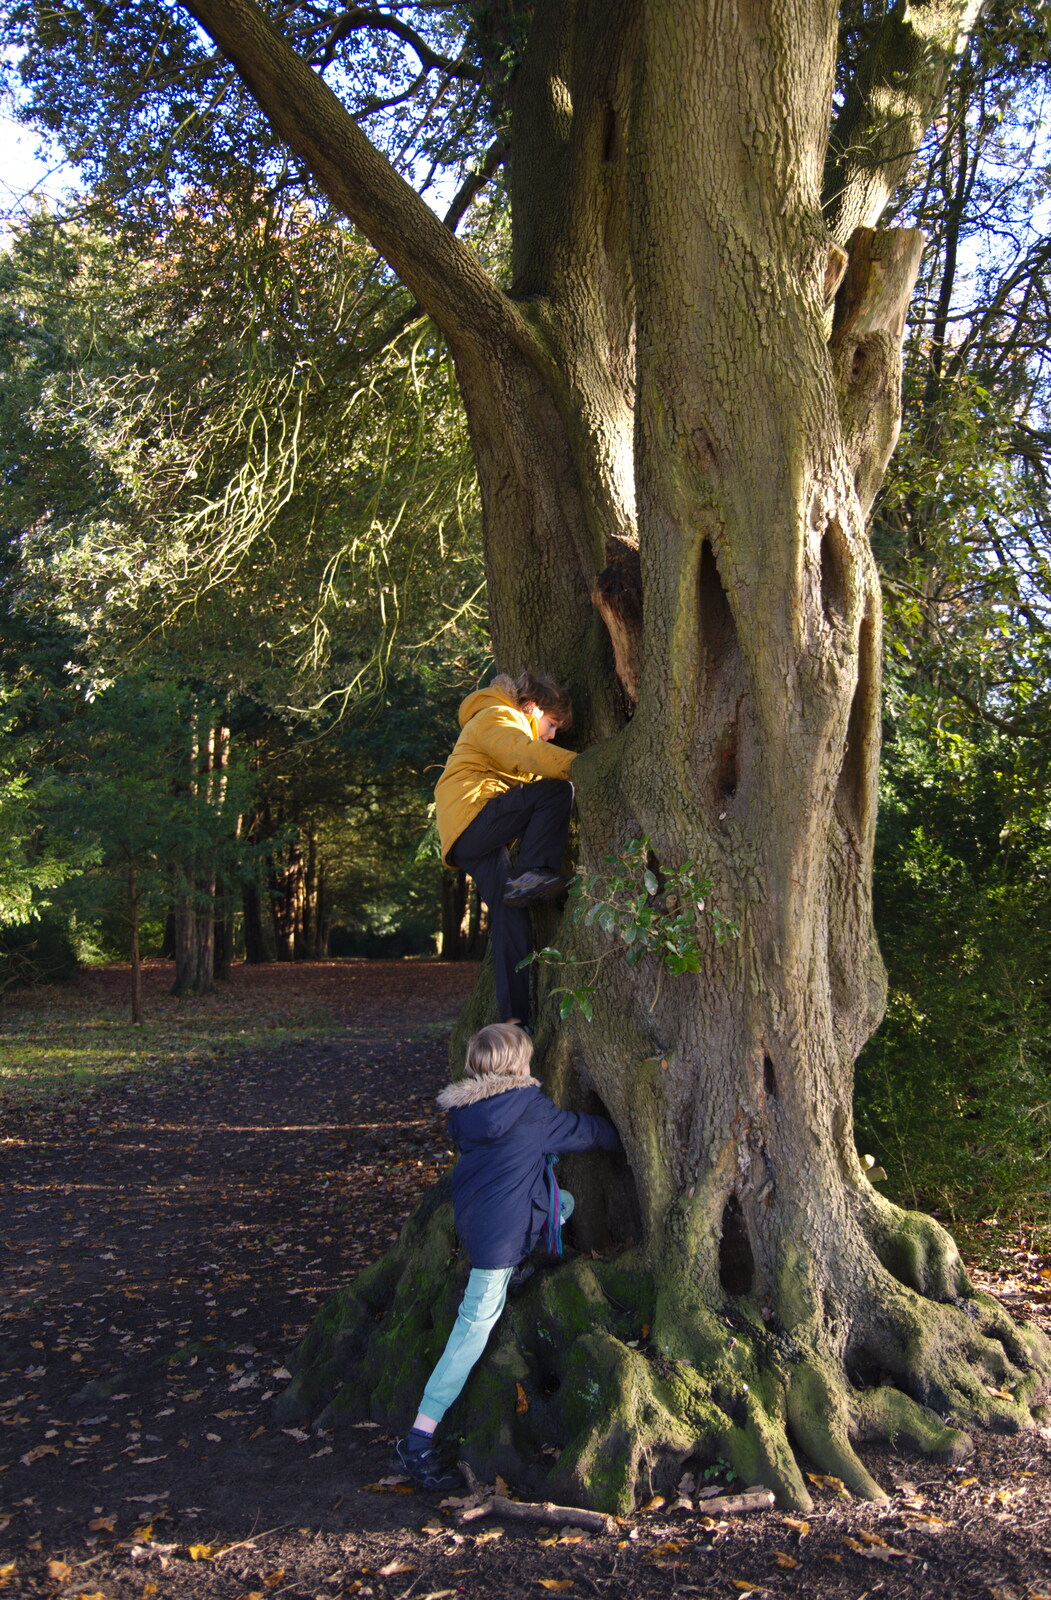 The boys climb a tree from The Tiles of Ickworth House, Horringer, Suffolk - 30th November 2019